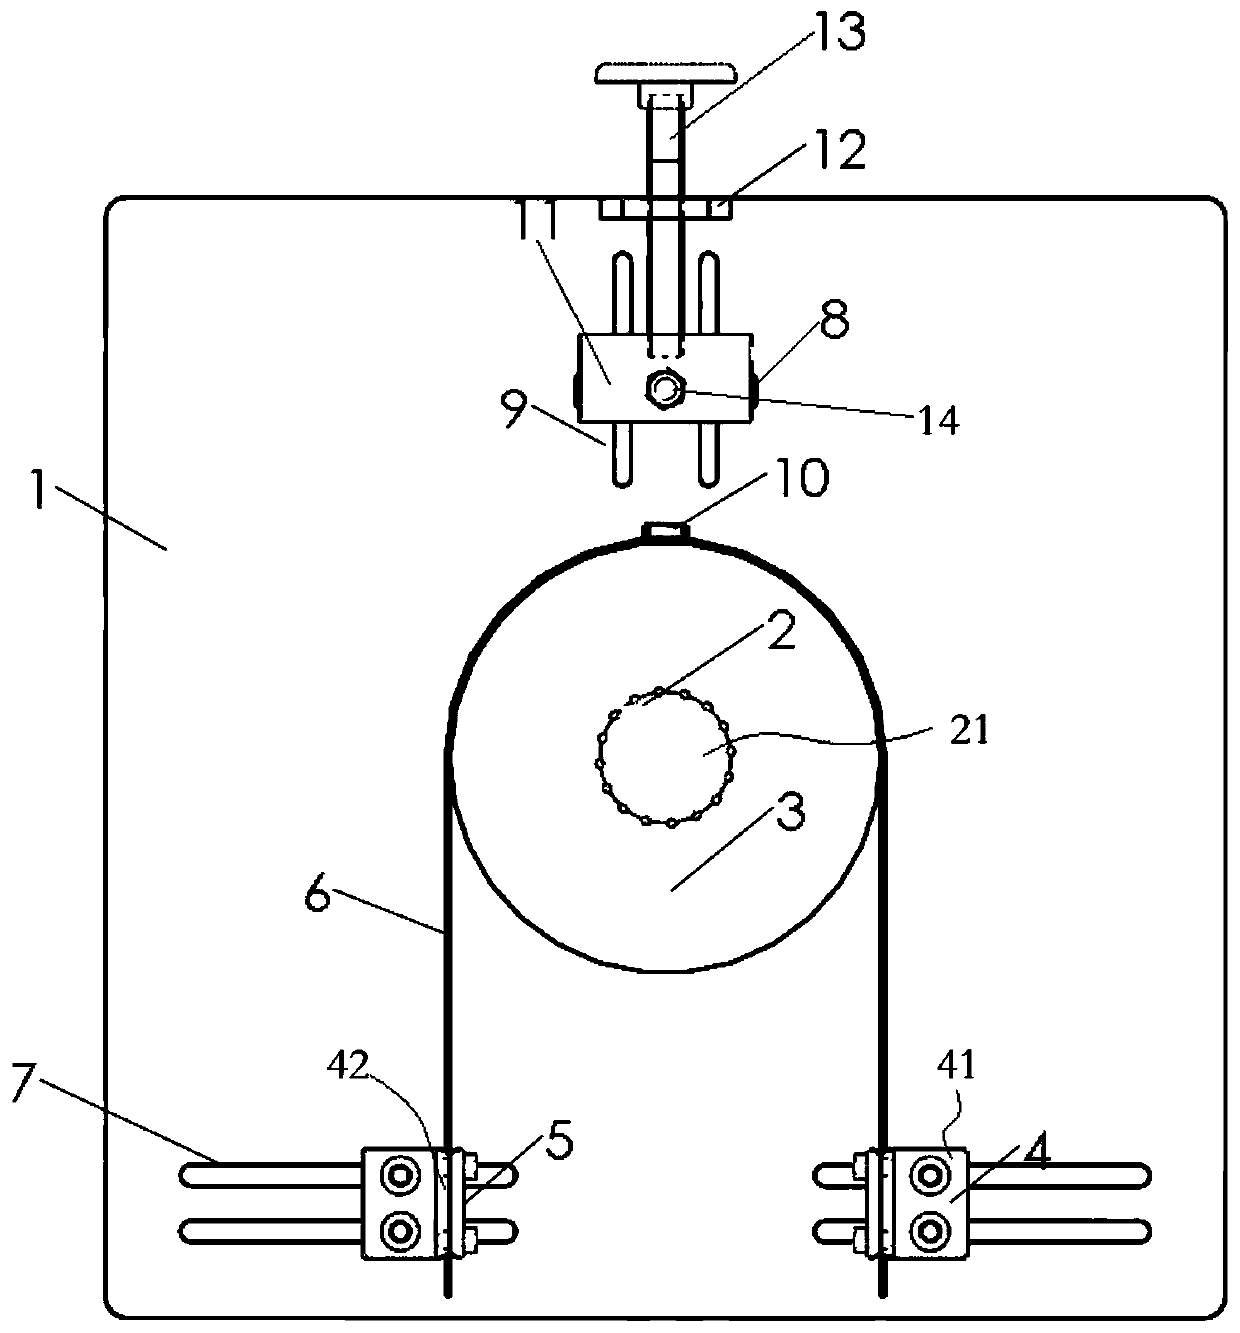 Device for testing superconducting tape